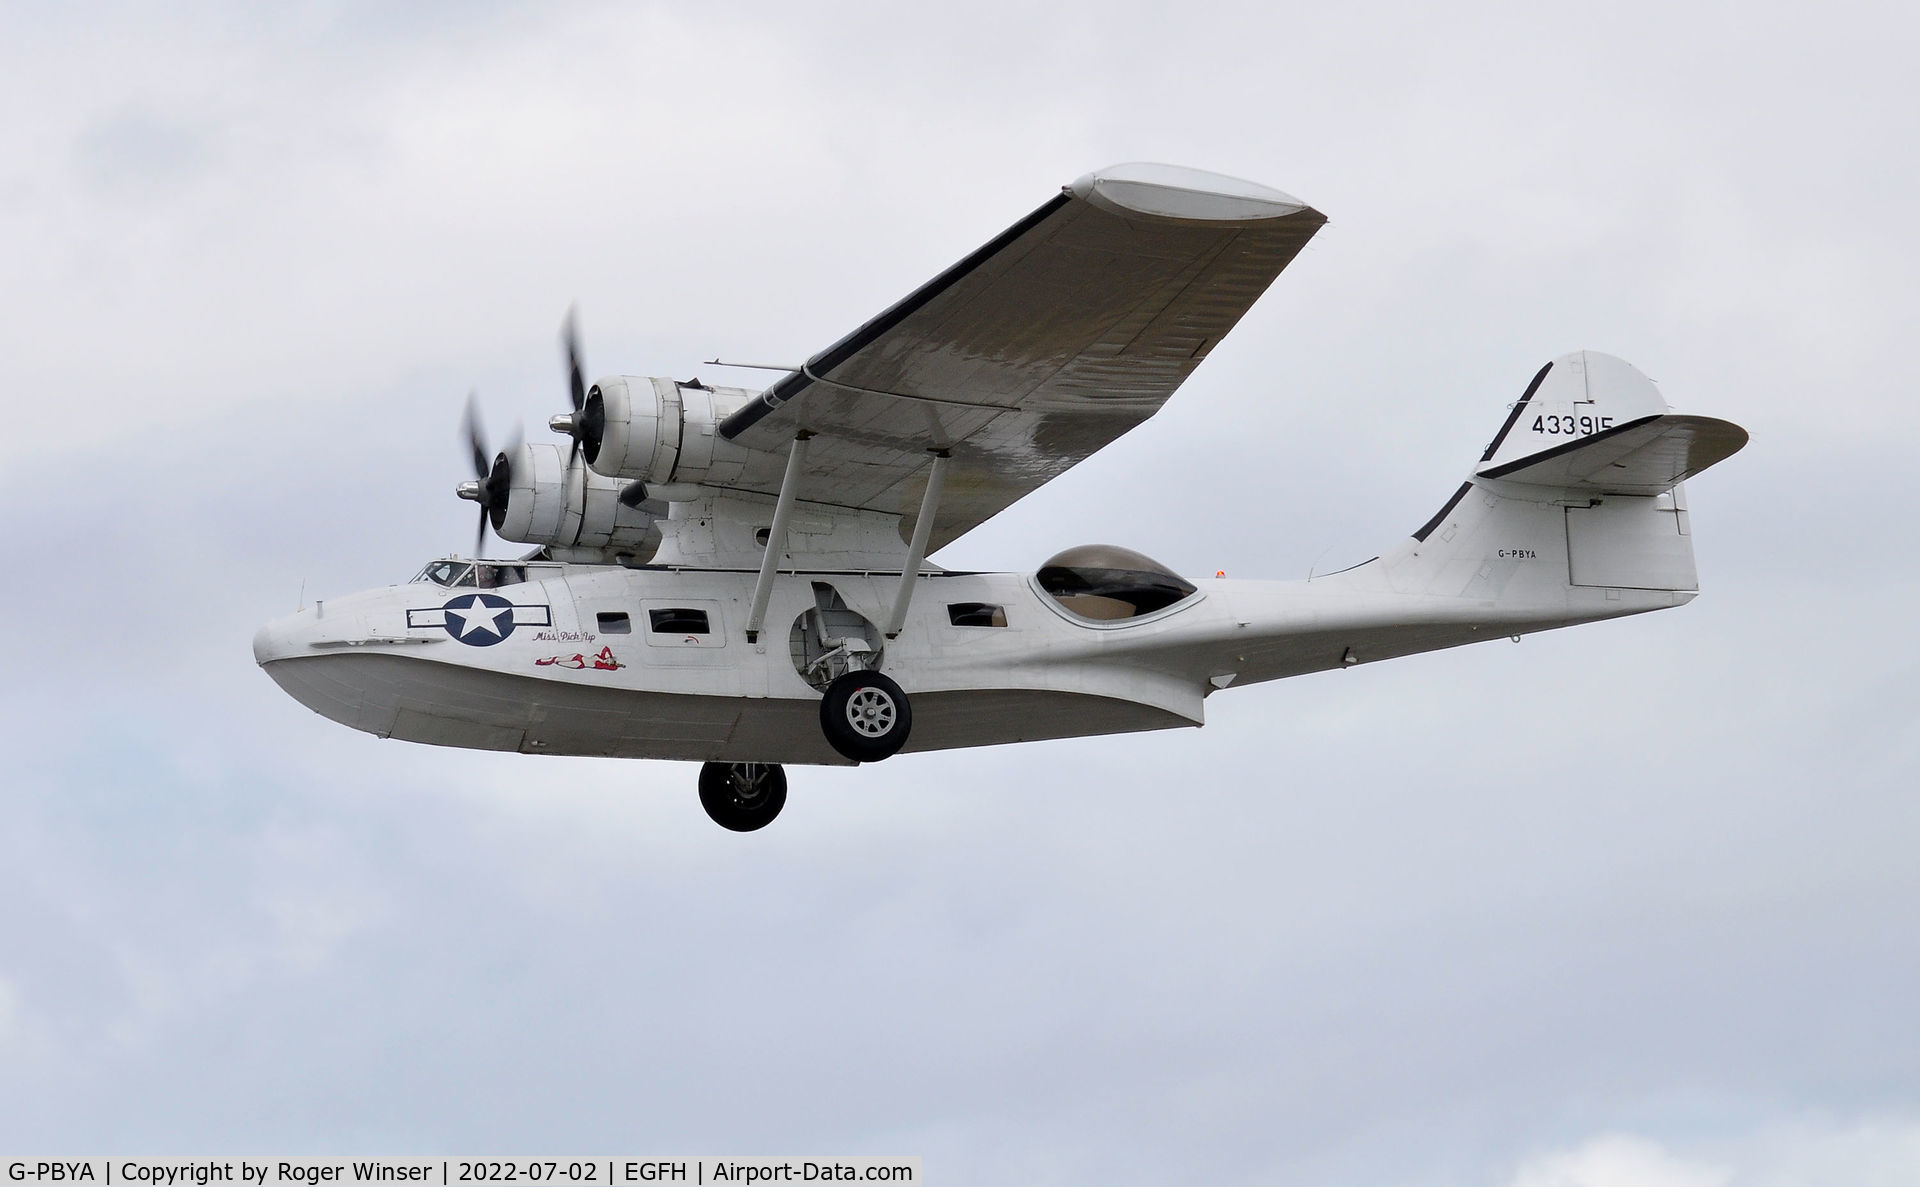 G-PBYA, 1944 Consolidated (Canadian Vickers) PBV-1A Canso A C/N CV-283, Visiting PBV-!A Canso departing Runway 22 to display on day 1 of the Wales Airshow 2022.